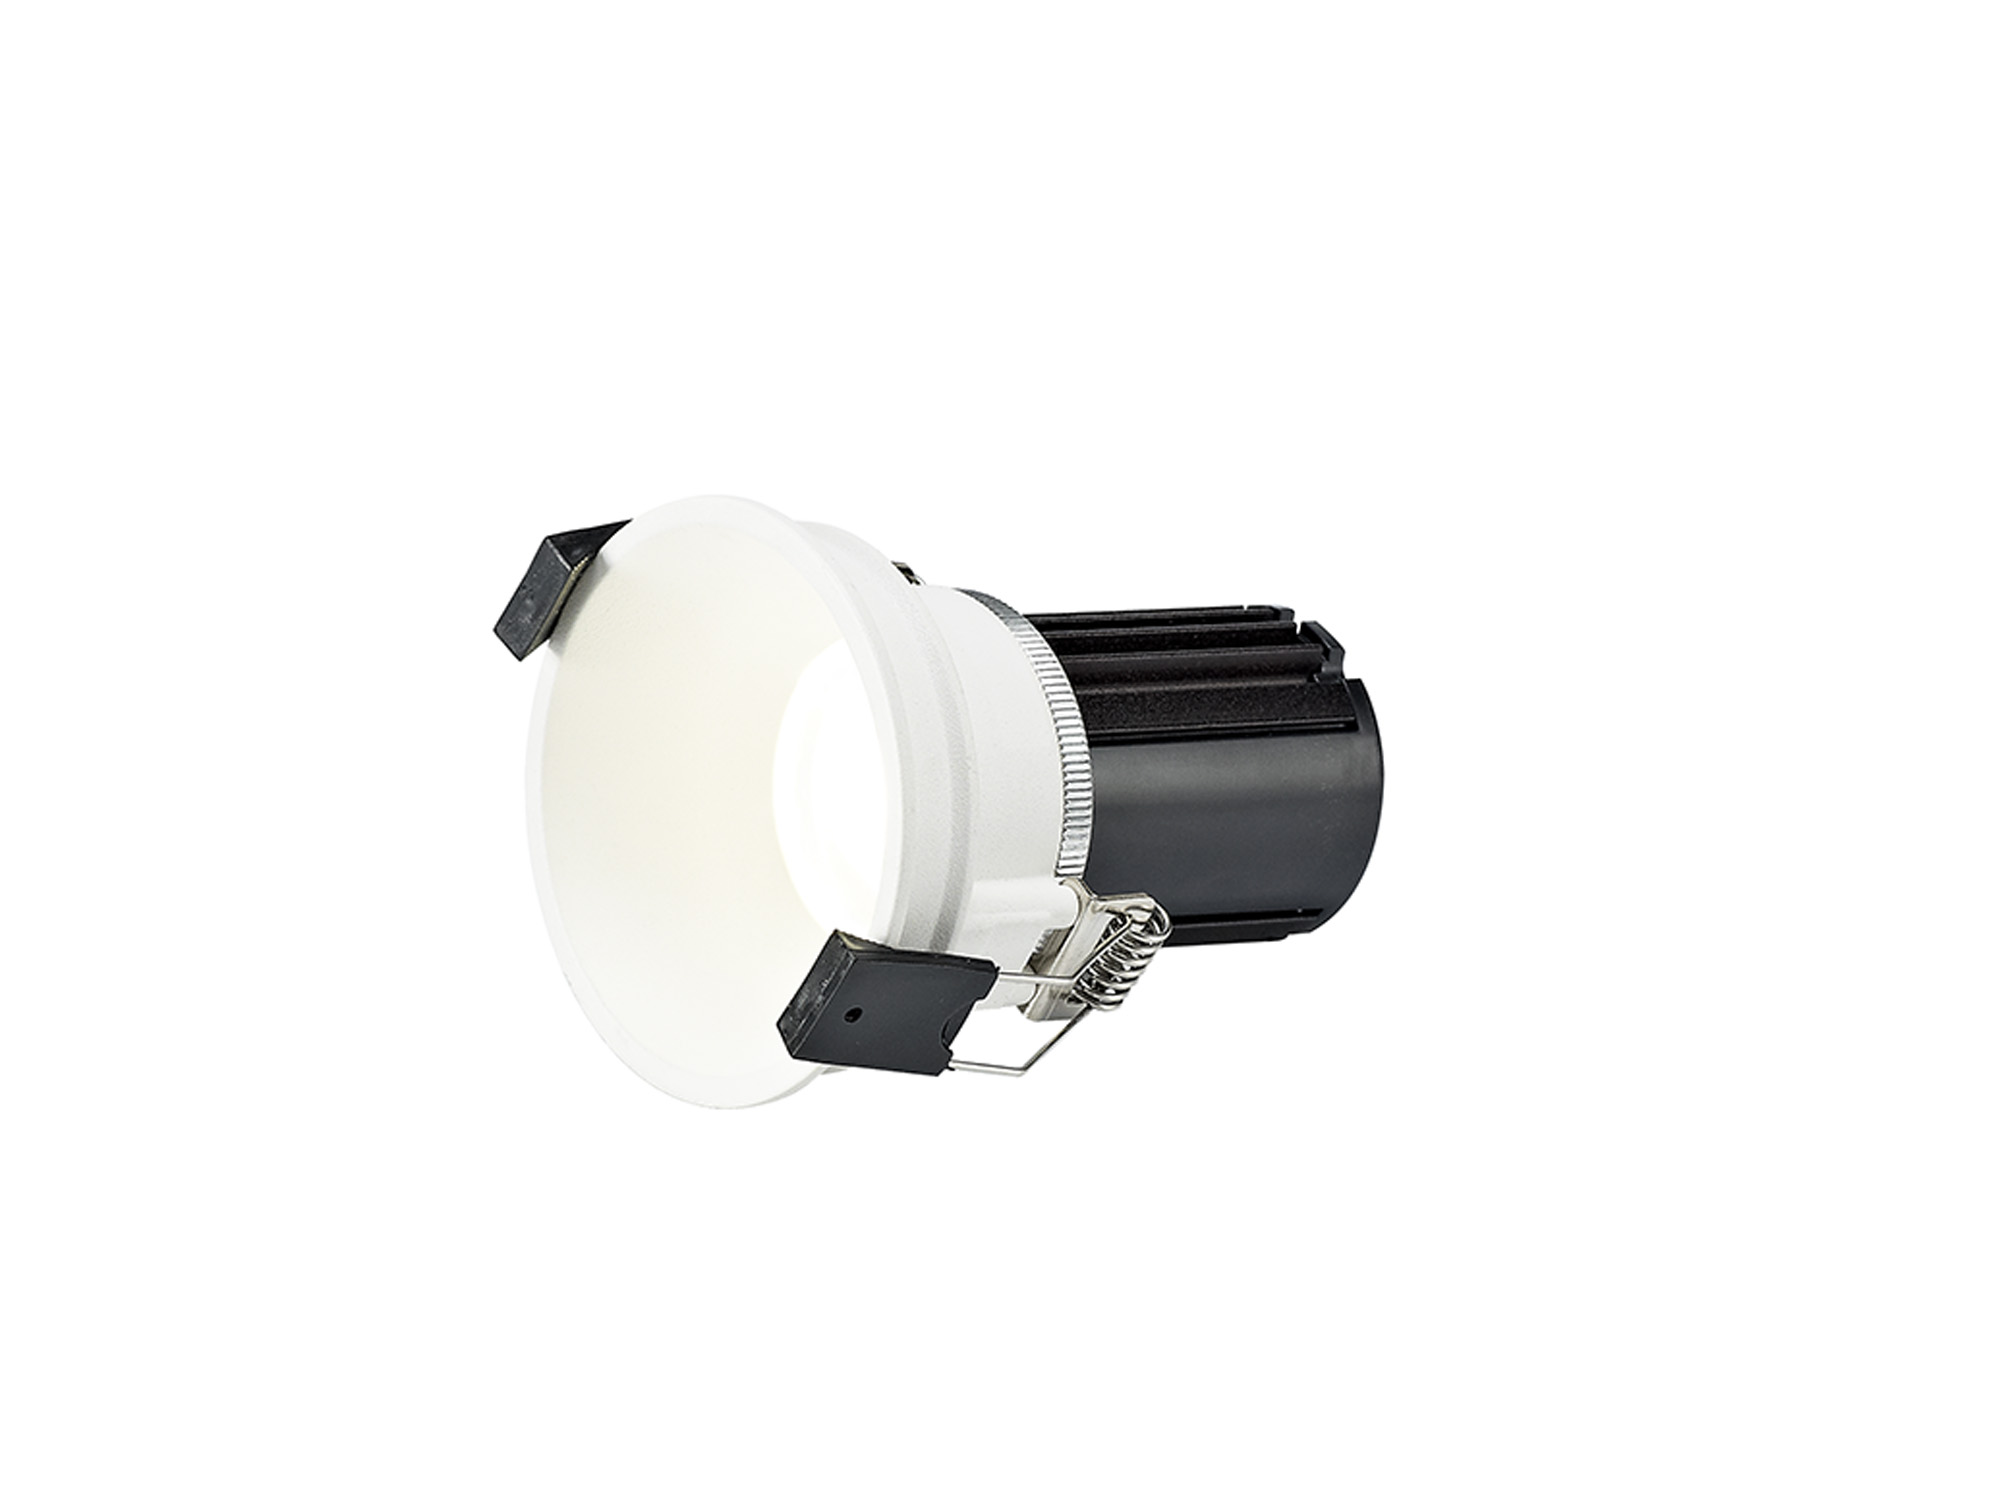 DM201614  Bania 12 Tridonic Powered 12W 4000K 1200lm 36° , 300mA CRI>90 LED Engine White Fixed Recessed Spotlight, Cut Out: 76mm, IP20, 5yrs Warranty